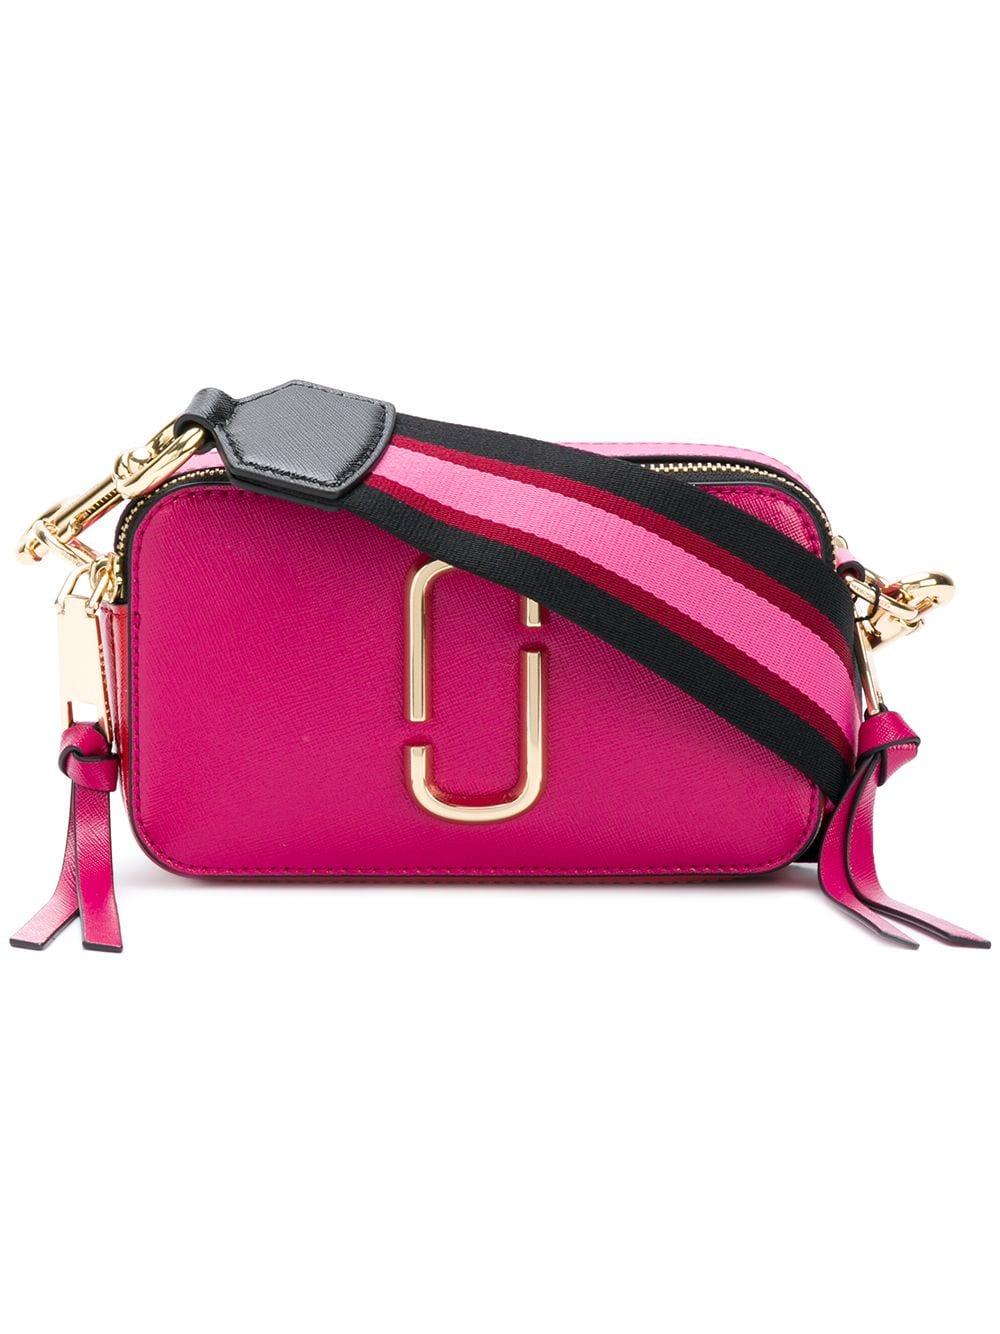 Marc Jacobs Snapshot Leather Bag in Pink - Save 18% - Lyst